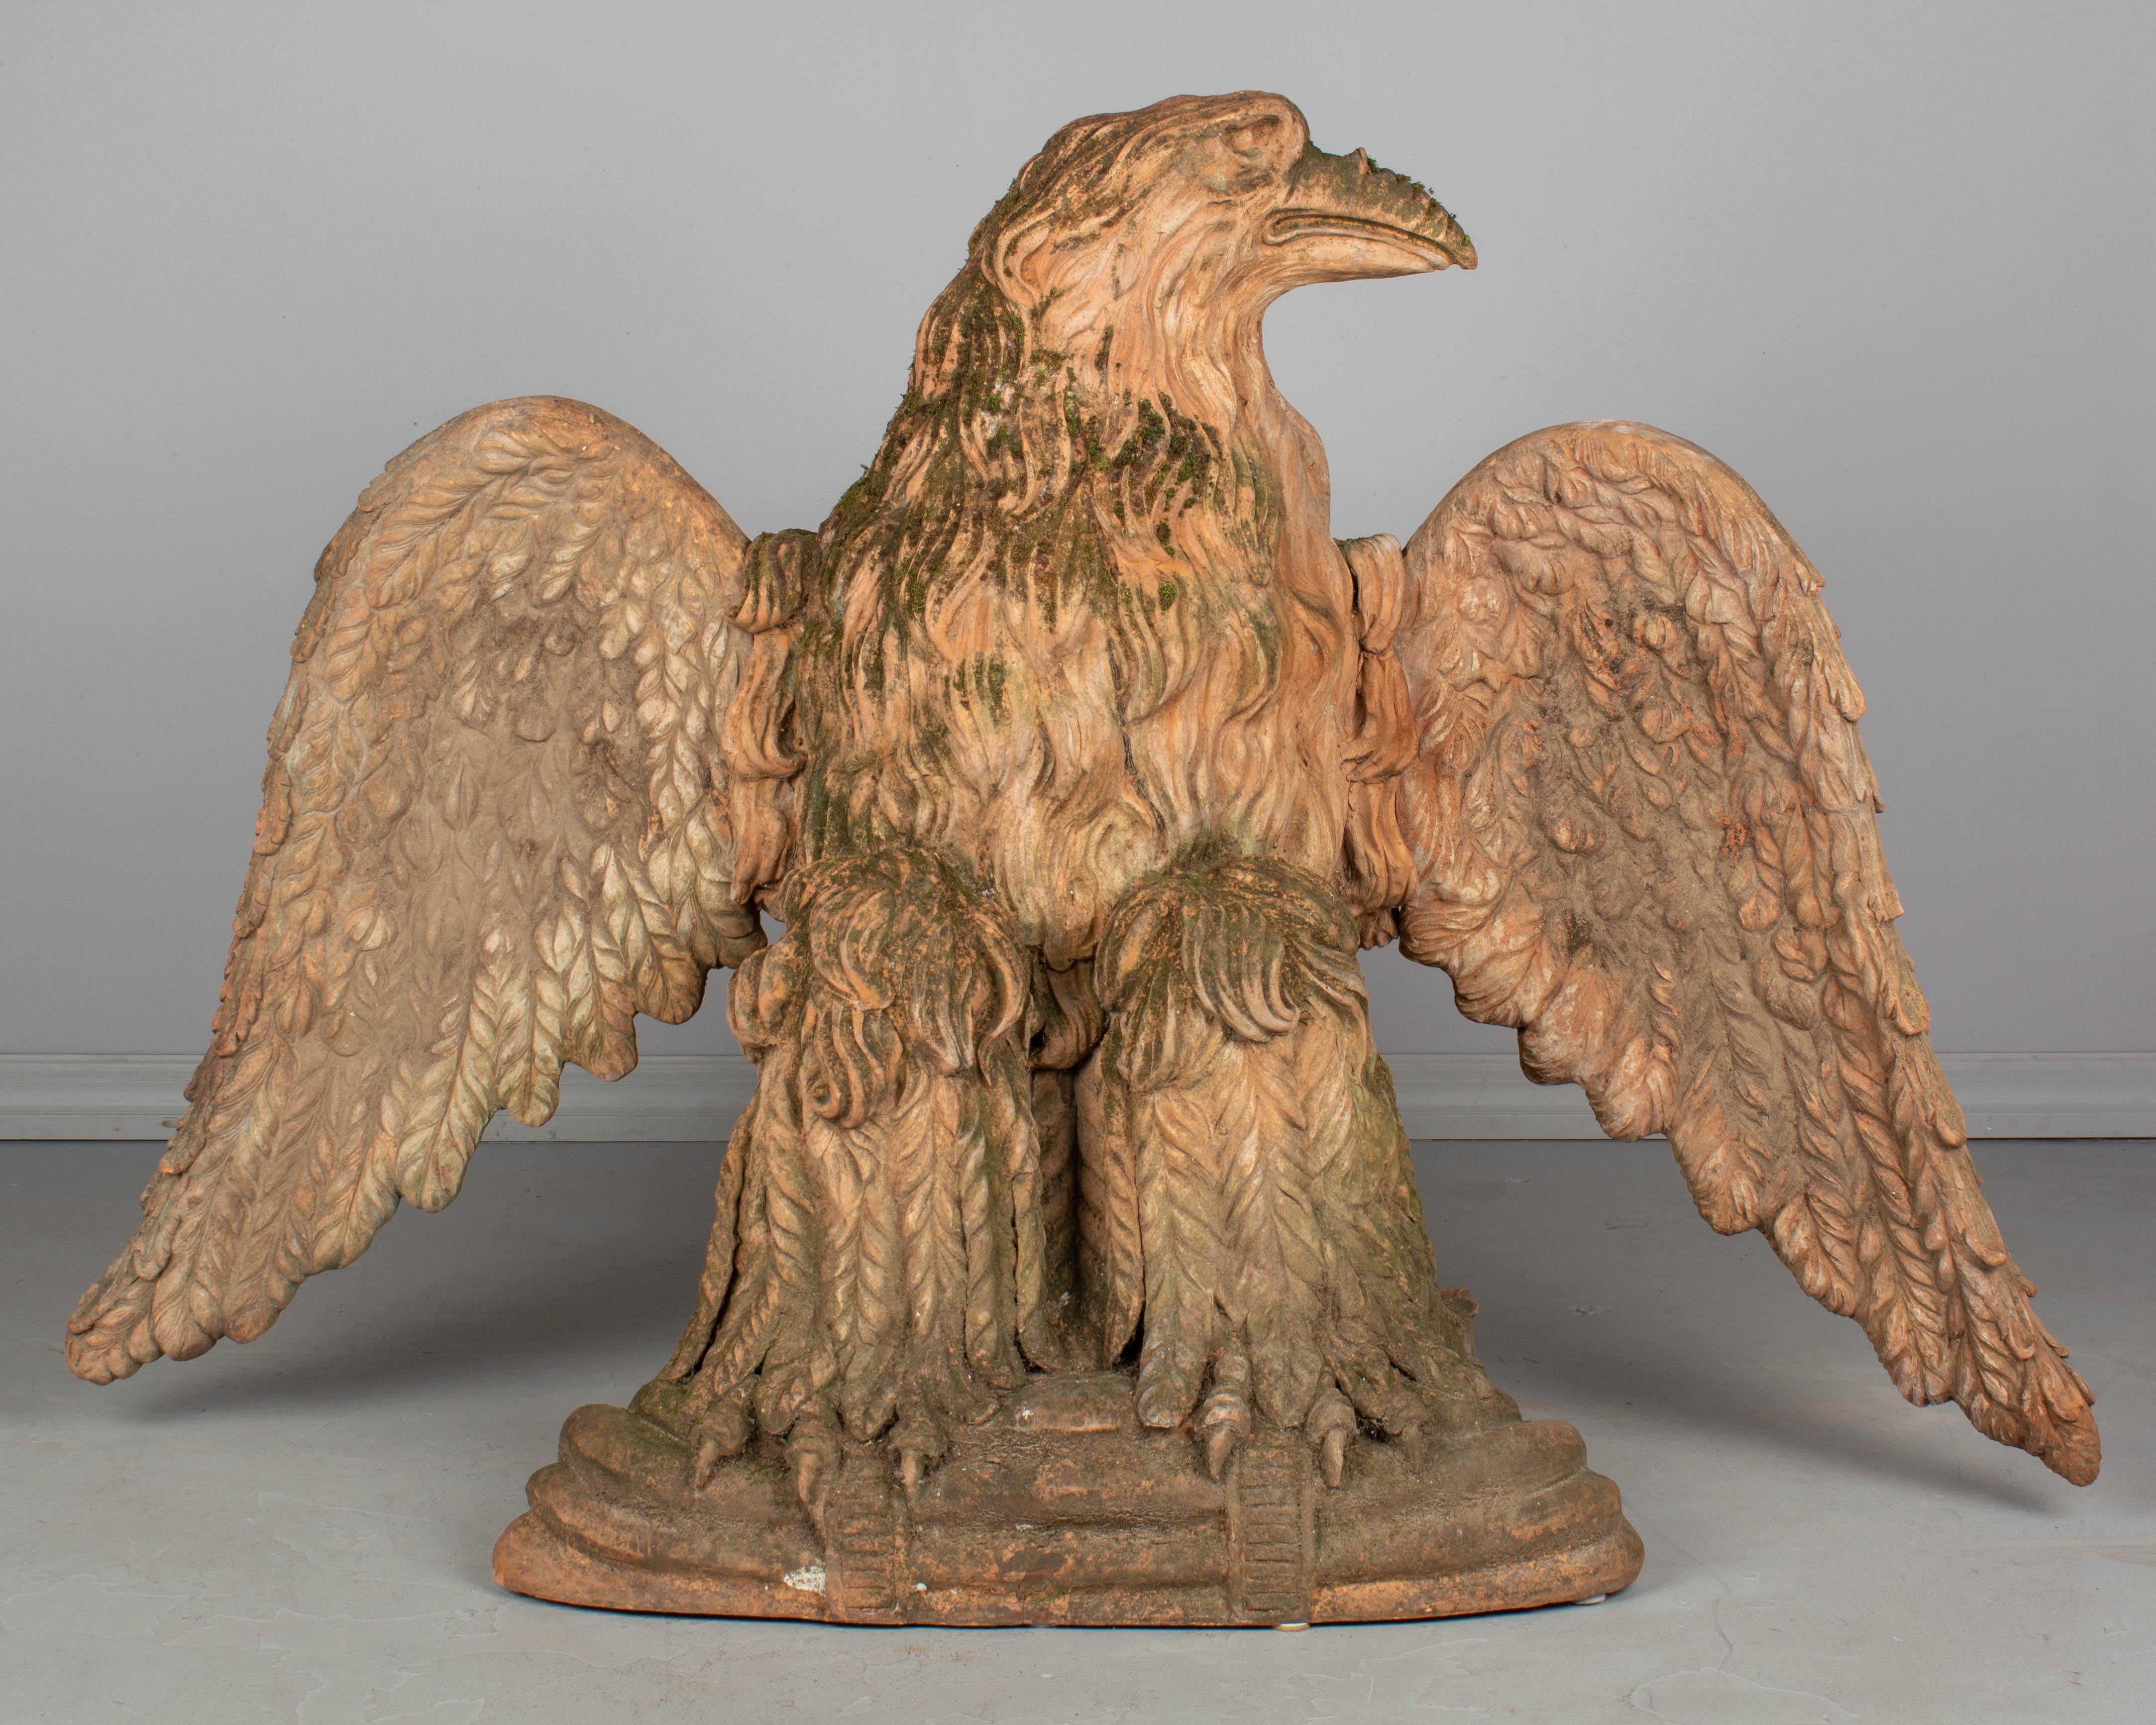 An exceptional pair of early 20th century French terracotta eagle sculptures. A true pair, these regal birds face each other with fierce expressions. They sit perched with impressive talons clutching a low plinth, wings outstretched. Richly detailed